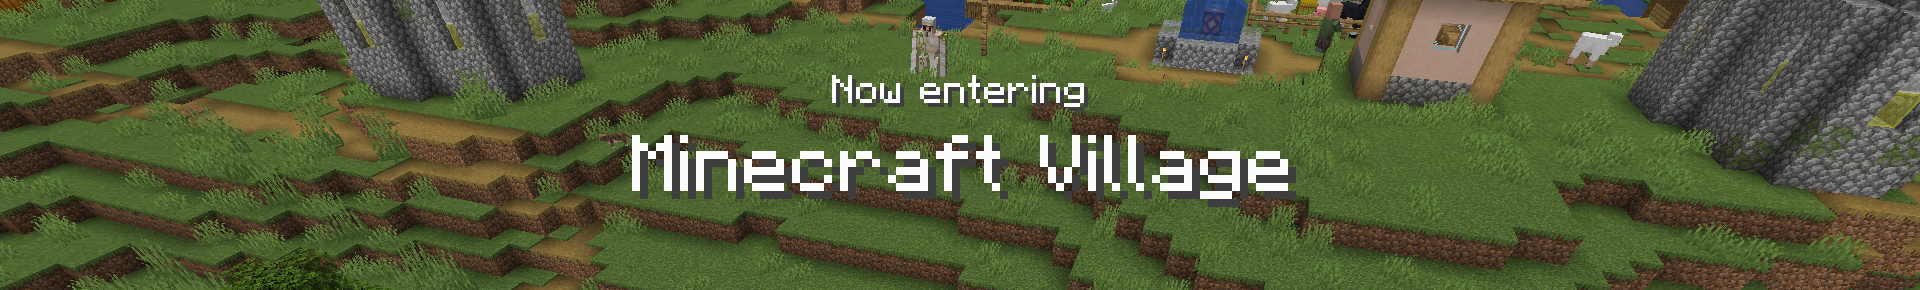 A screenshot of the mod's zone title screen showing that the player is entering a "Minecraft Village"